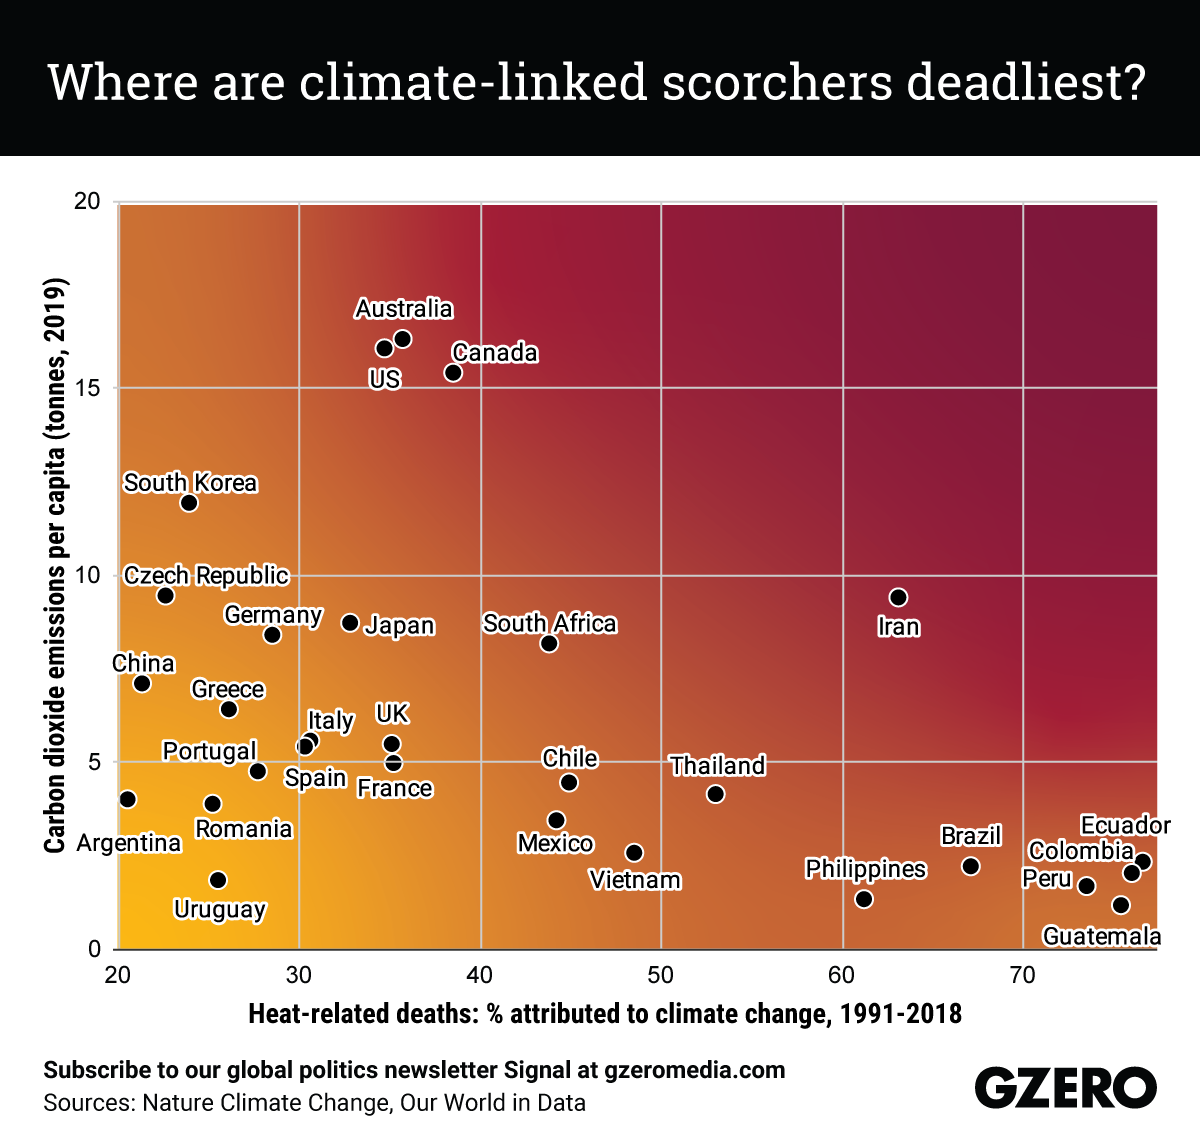 The Graphic Truth: Where are climate-linked scorchers deadliest?